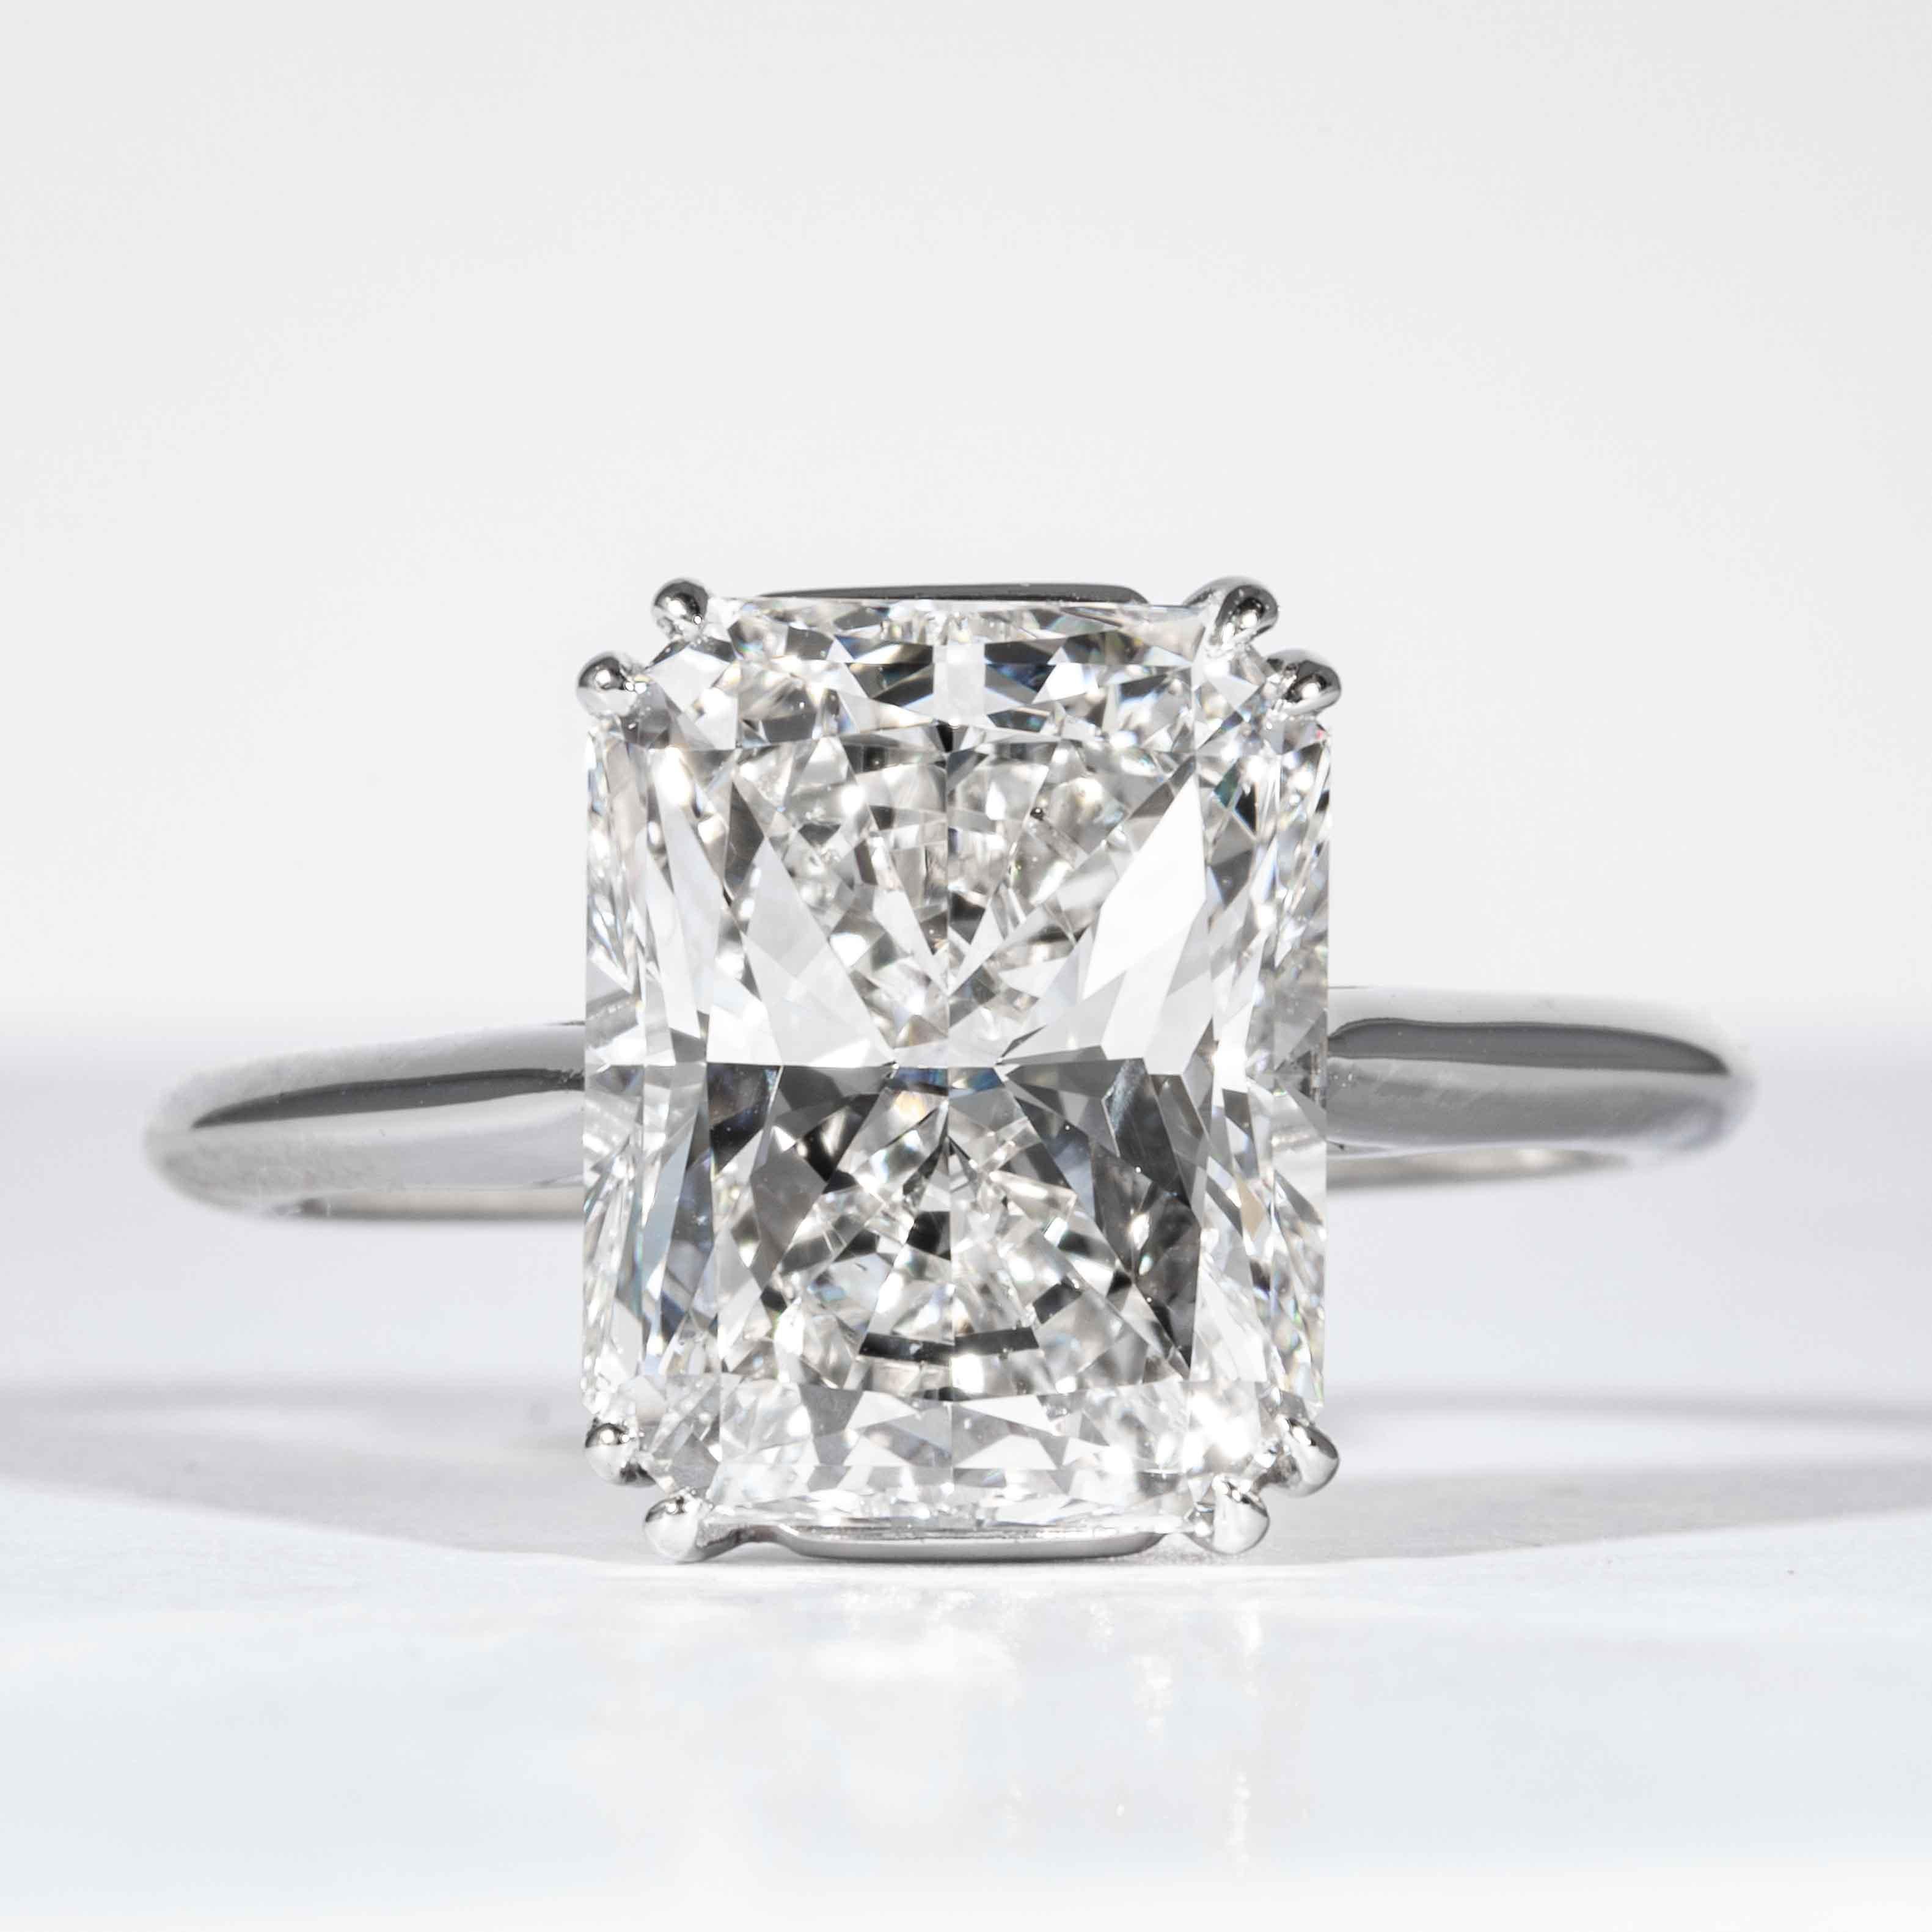 This diamond ring is offered by Shreve, Crump & Low. This 4.50 carat GIA certified F VS2 radiant cut diamond measuring 10.66 x 8.75 x 5.93mm is custom set in a classically handcrafted Shreve, Crump & Low platinum solitaire ring. The 4.50 carat